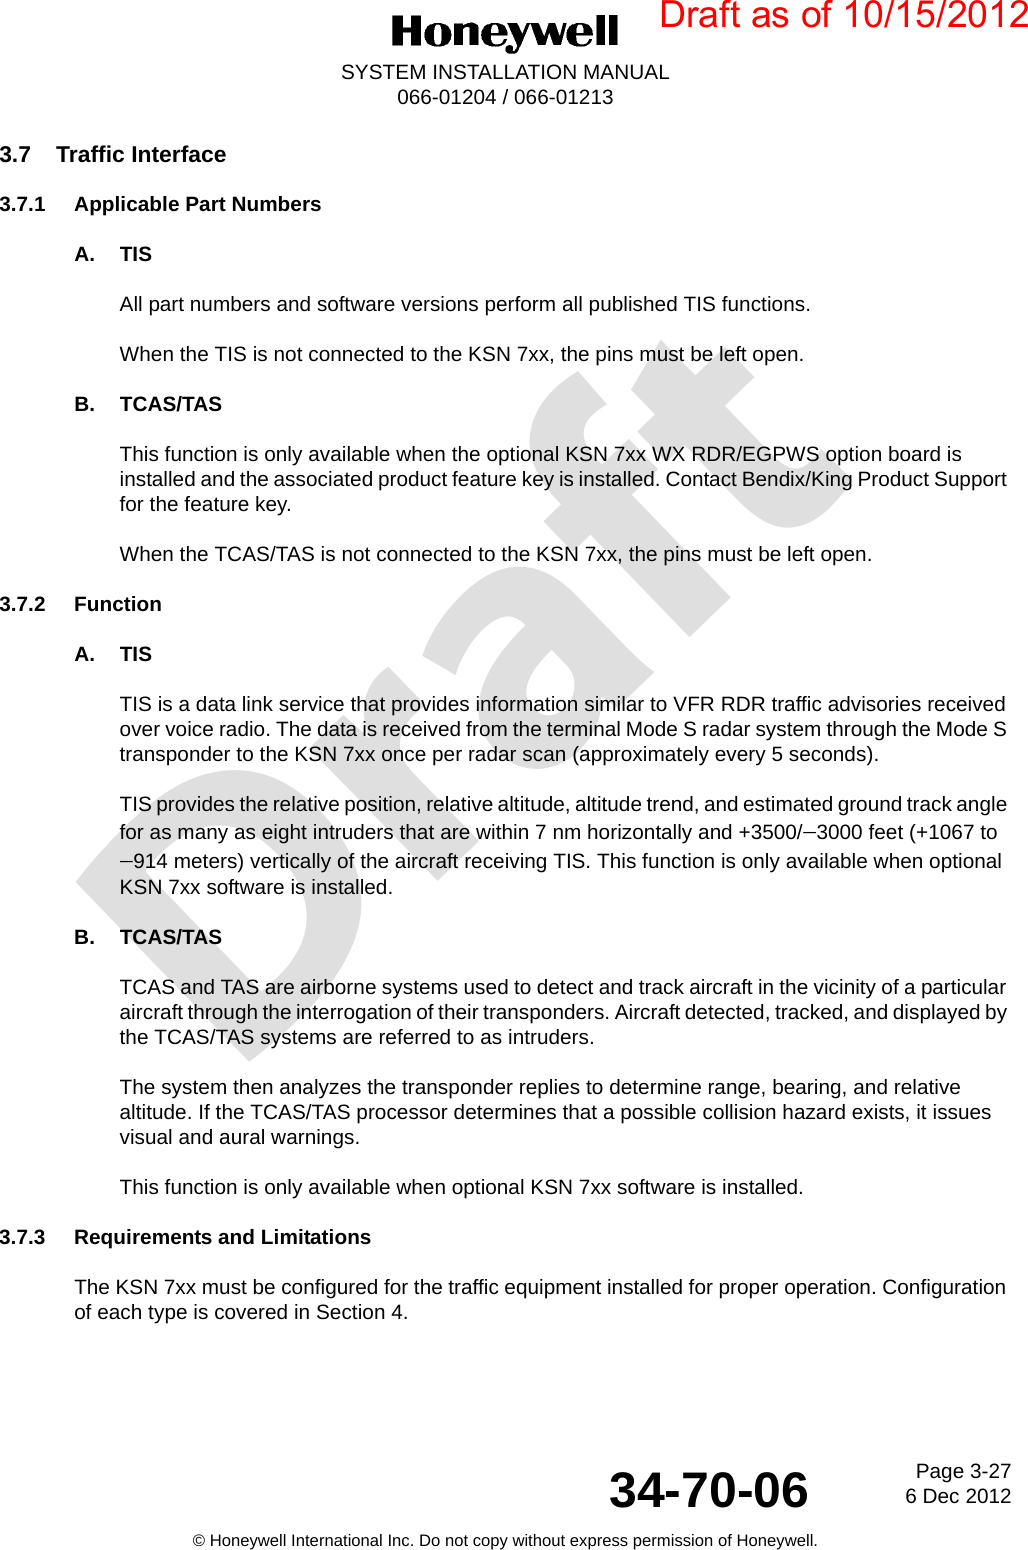 DraftPage 3-276 Dec 201234-70-06SYSTEM INSTALLATION MANUAL066-01204 / 066-01213© Honeywell International Inc. Do not copy without express permission of Honeywell.3.7 Traffic Interface3.7.1 Applicable Part NumbersA. TISAll part numbers and software versions perform all published TIS functions.When the TIS is not connected to the KSN 7xx, the pins must be left open.B. TCAS/TASThis function is only available when the optional KSN 7xx WX RDR/EGPWS option board is installed and the associated product feature key is installed. Contact Bendix/King Product Support for the feature key.When the TCAS/TAS is not connected to the KSN 7xx, the pins must be left open.3.7.2 FunctionA. TISTIS is a data link service that provides information similar to VFR RDR traffic advisories received over voice radio. The data is received from the terminal Mode S radar system through the Mode S transponder to the KSN 7xx once per radar scan (approximately every 5 seconds).TIS provides the relative position, relative altitude, altitude trend, and estimated ground track angle for as many as eight intruders that are within 7 nm horizontally and +3500/3000 feet (+1067 to 914 meters) vertically of the aircraft receiving TIS. This function is only available when optional KSN 7xx software is installed.B. TCAS/TASTCAS and TAS are airborne systems used to detect and track aircraft in the vicinity of a particular aircraft through the interrogation of their transponders. Aircraft detected, tracked, and displayed by the TCAS/TAS systems are referred to as intruders.The system then analyzes the transponder replies to determine range, bearing, and relative altitude. If the TCAS/TAS processor determines that a possible collision hazard exists, it issues visual and aural warnings.This function is only available when optional KSN 7xx software is installed.3.7.3 Requirements and LimitationsThe KSN 7xx must be configured for the traffic equipment installed for proper operation. Configuration of each type is covered in Section 4.Draft as of 10/15/2012